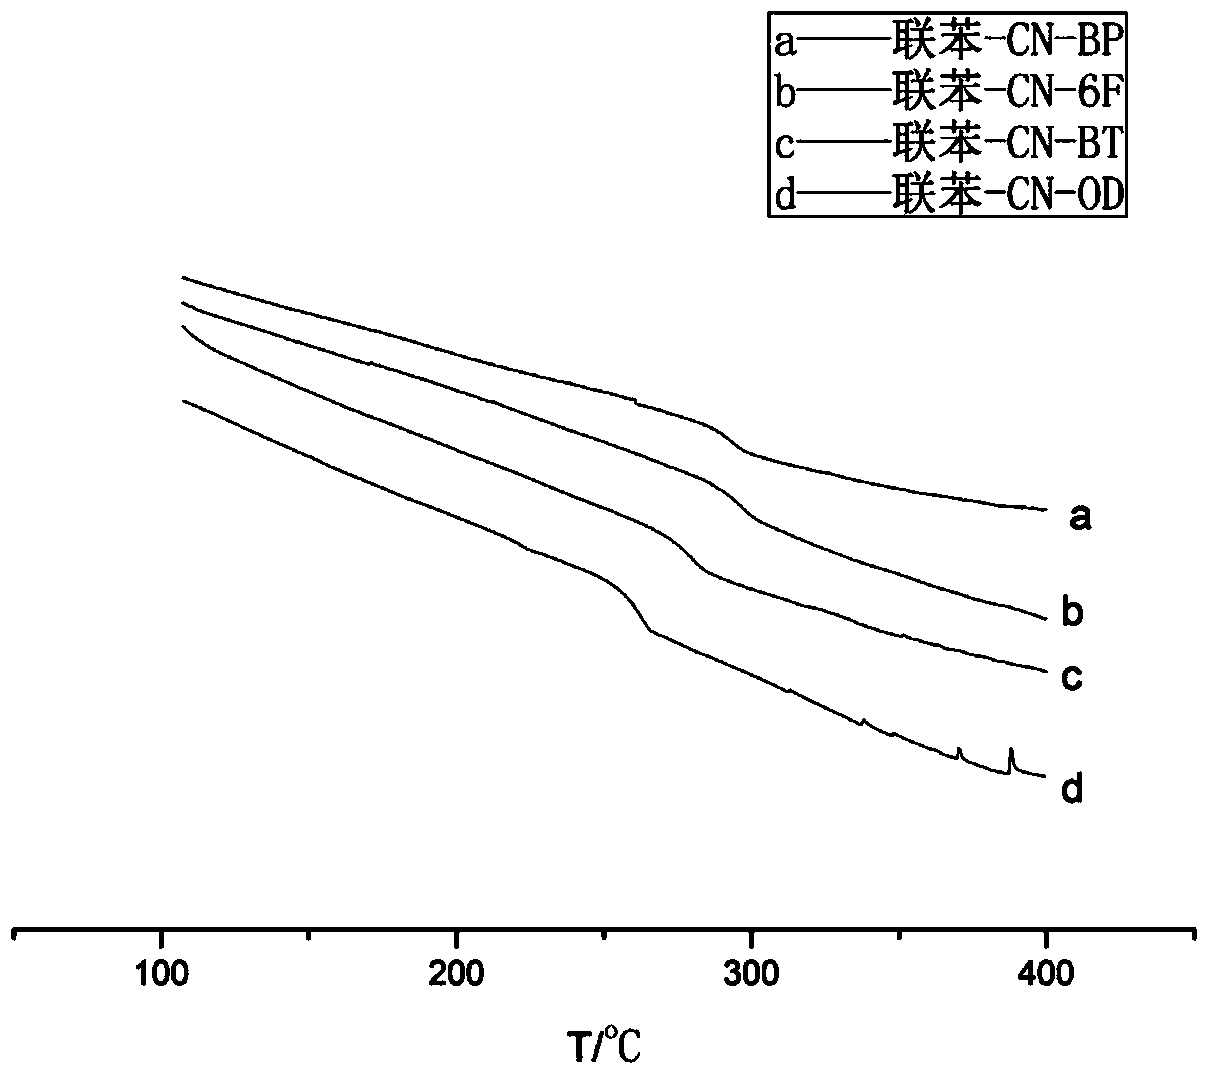 High-adhesion-property low-linear-expansion-coefficient polyimide film material and preparation method thereof